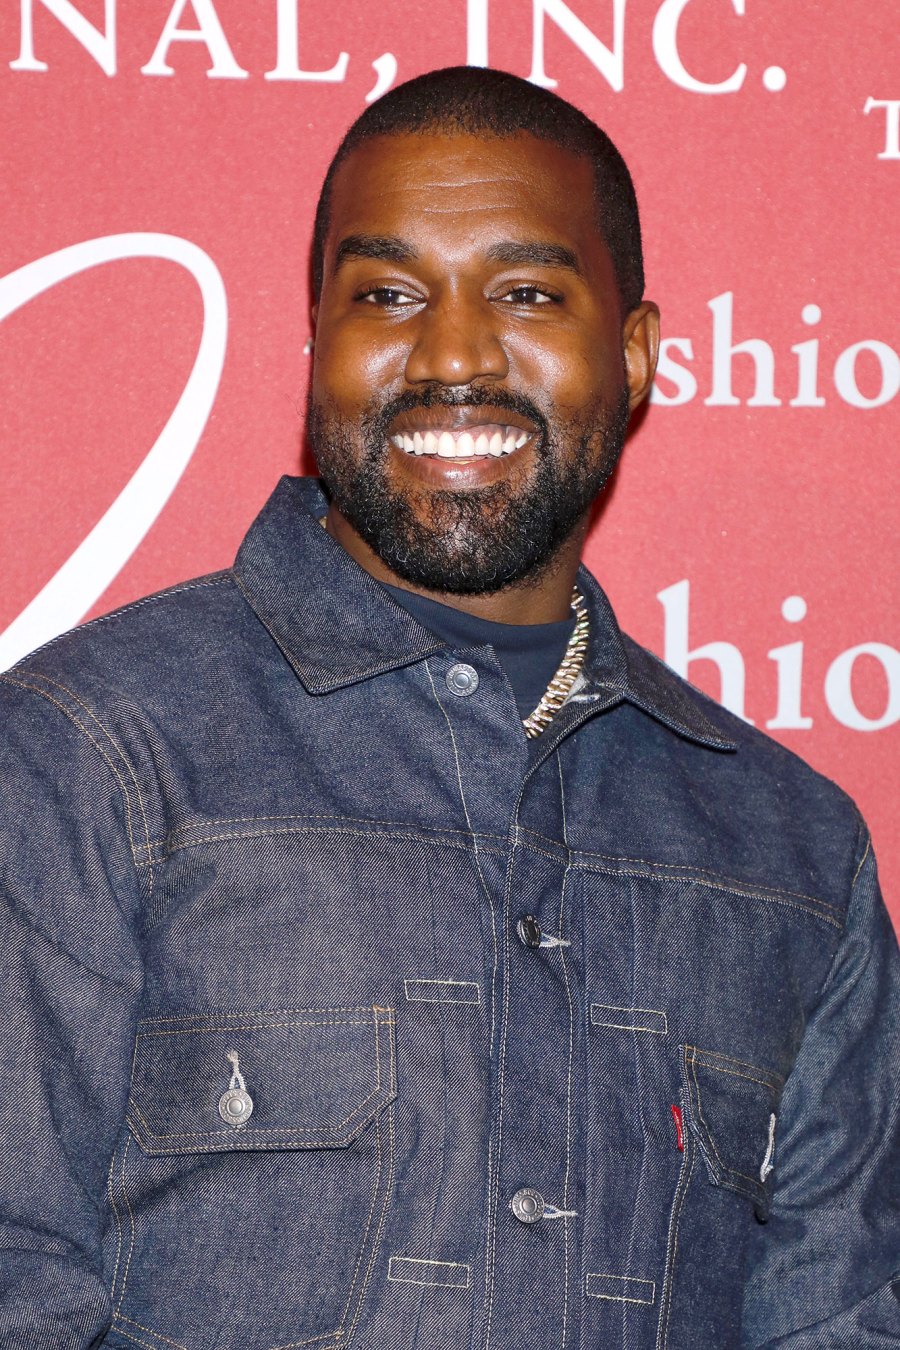 Kanye West Had COVID-19, Comes Out as Anti-Vaxxer: 5 Revelations